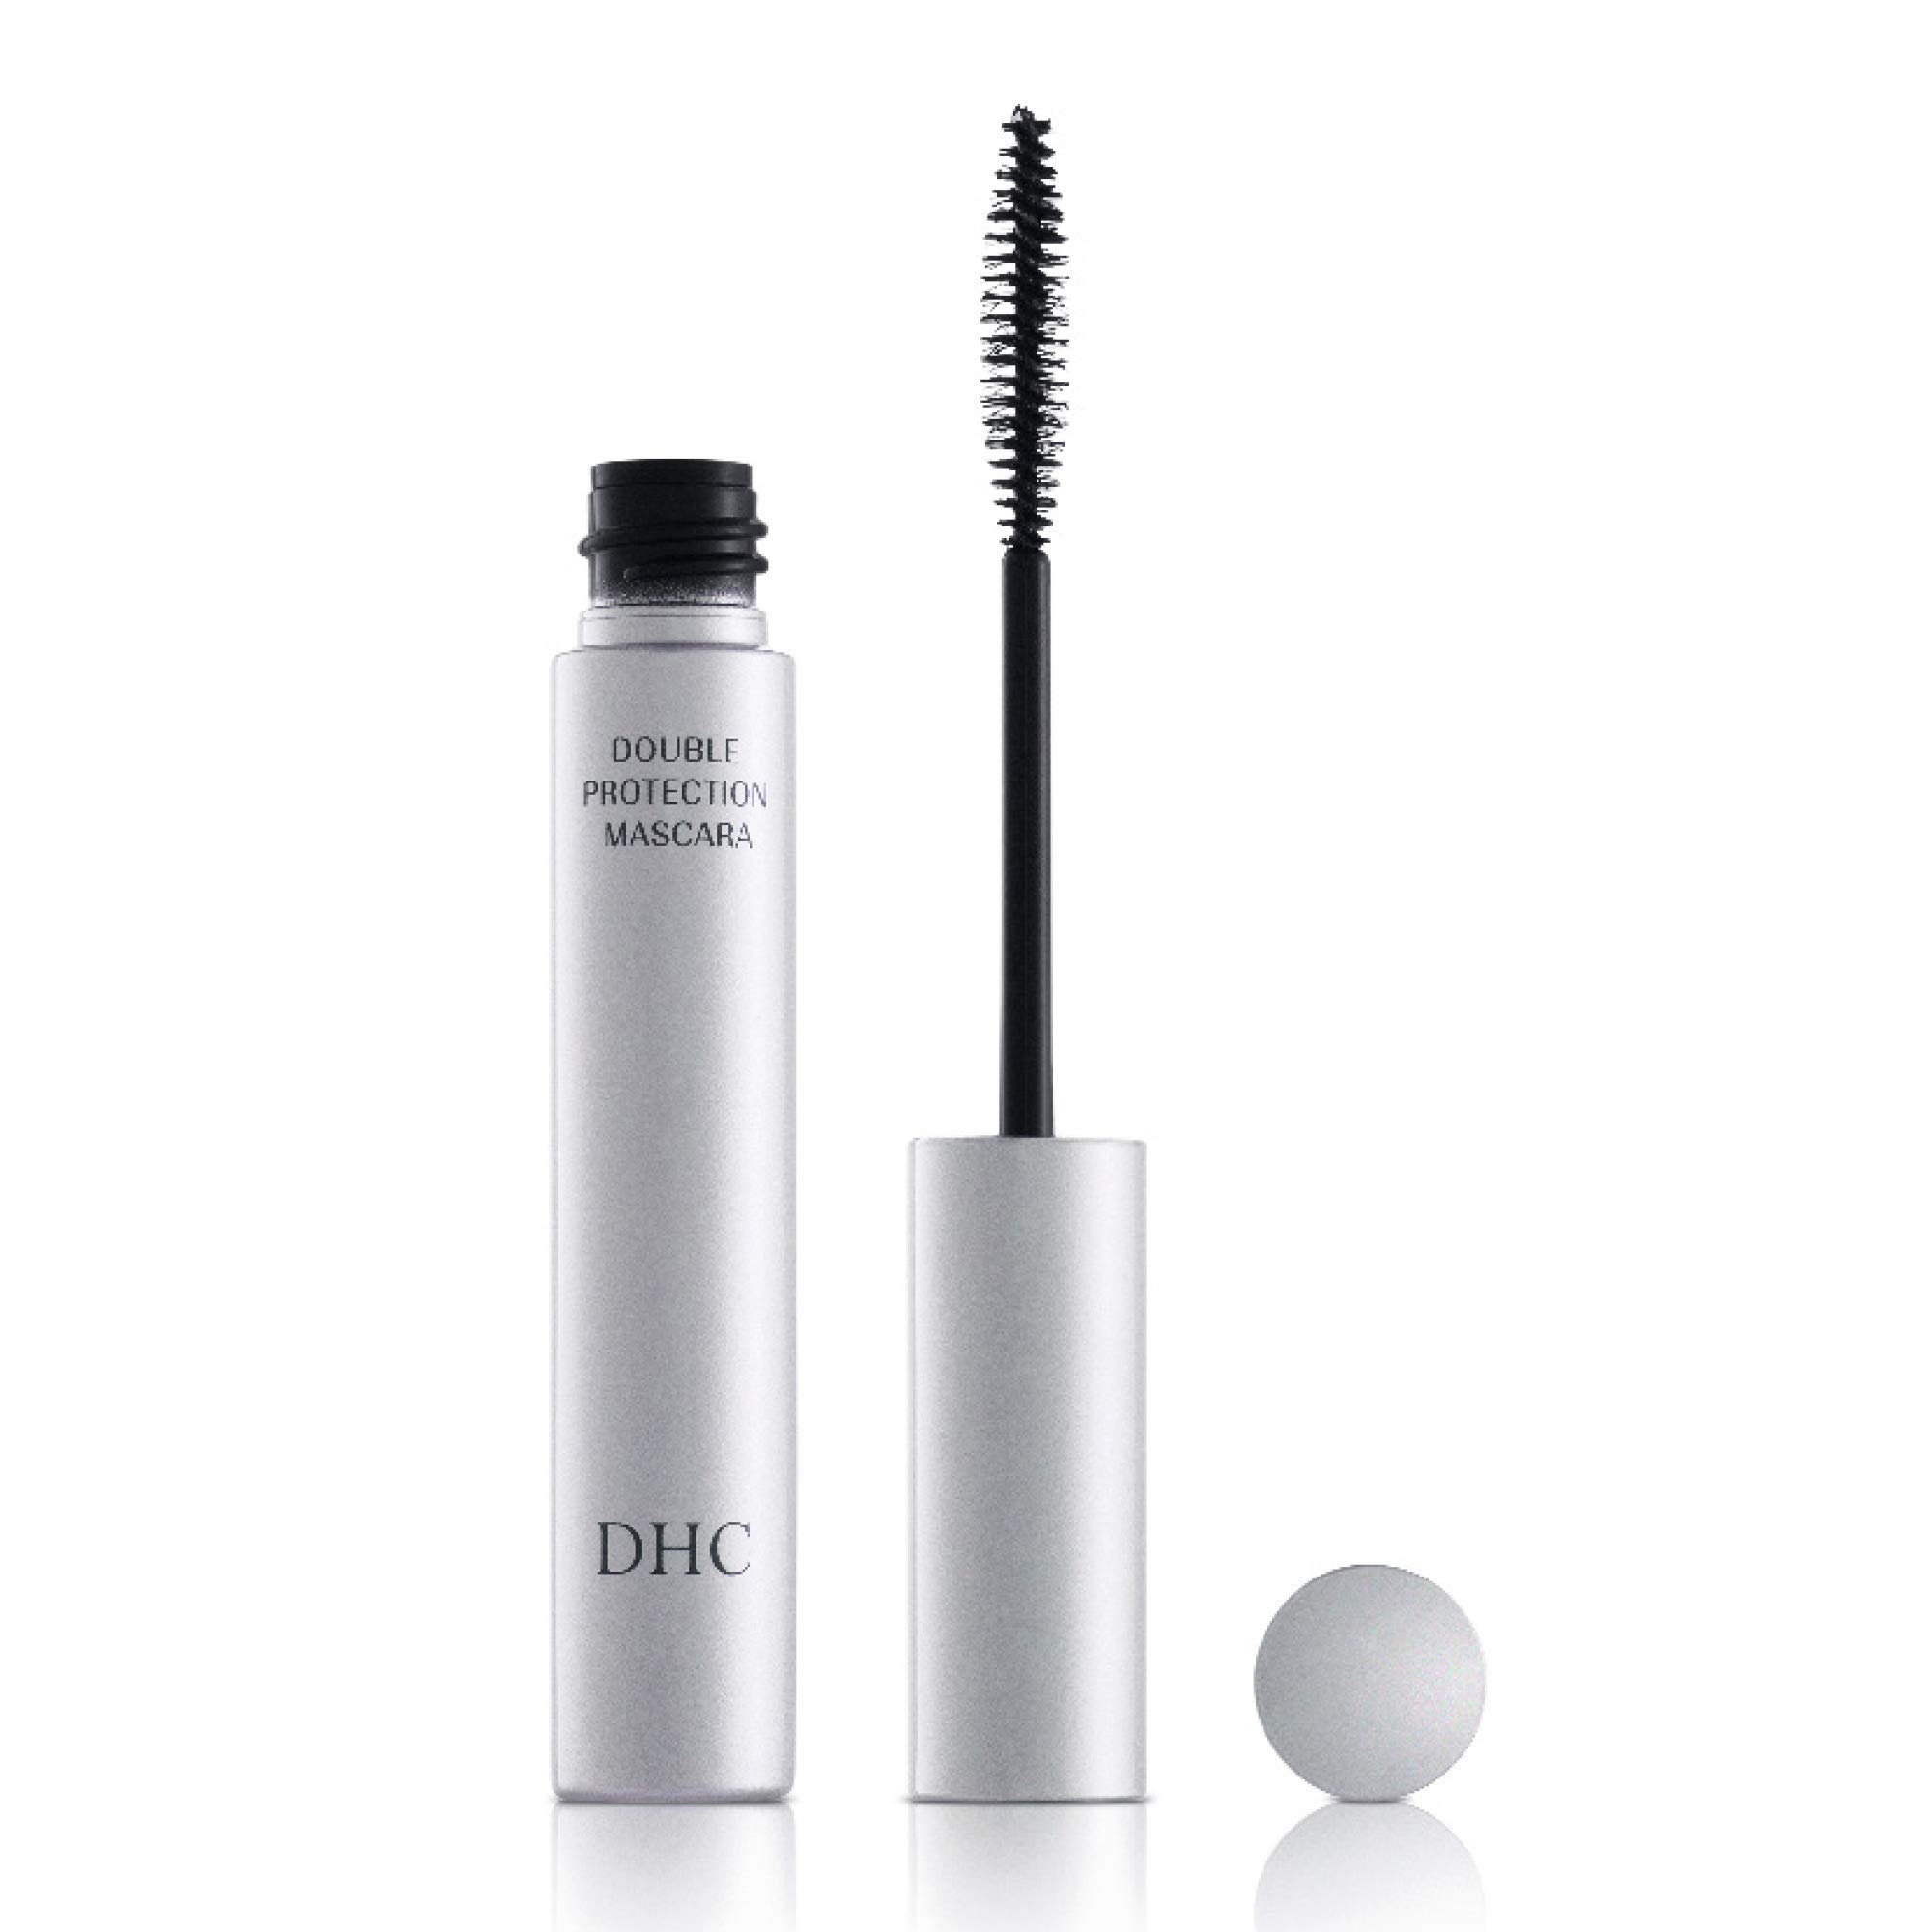 DHC Line and Define 2-Piece Makeup Kit, Mascara Perfect Pro Double Protection (Black) 0.17 oz Net wt, Liquid Eyeliner EX (Black) 0.01 fl oz, Water Resistant & Smudge Proof, All Day Wear